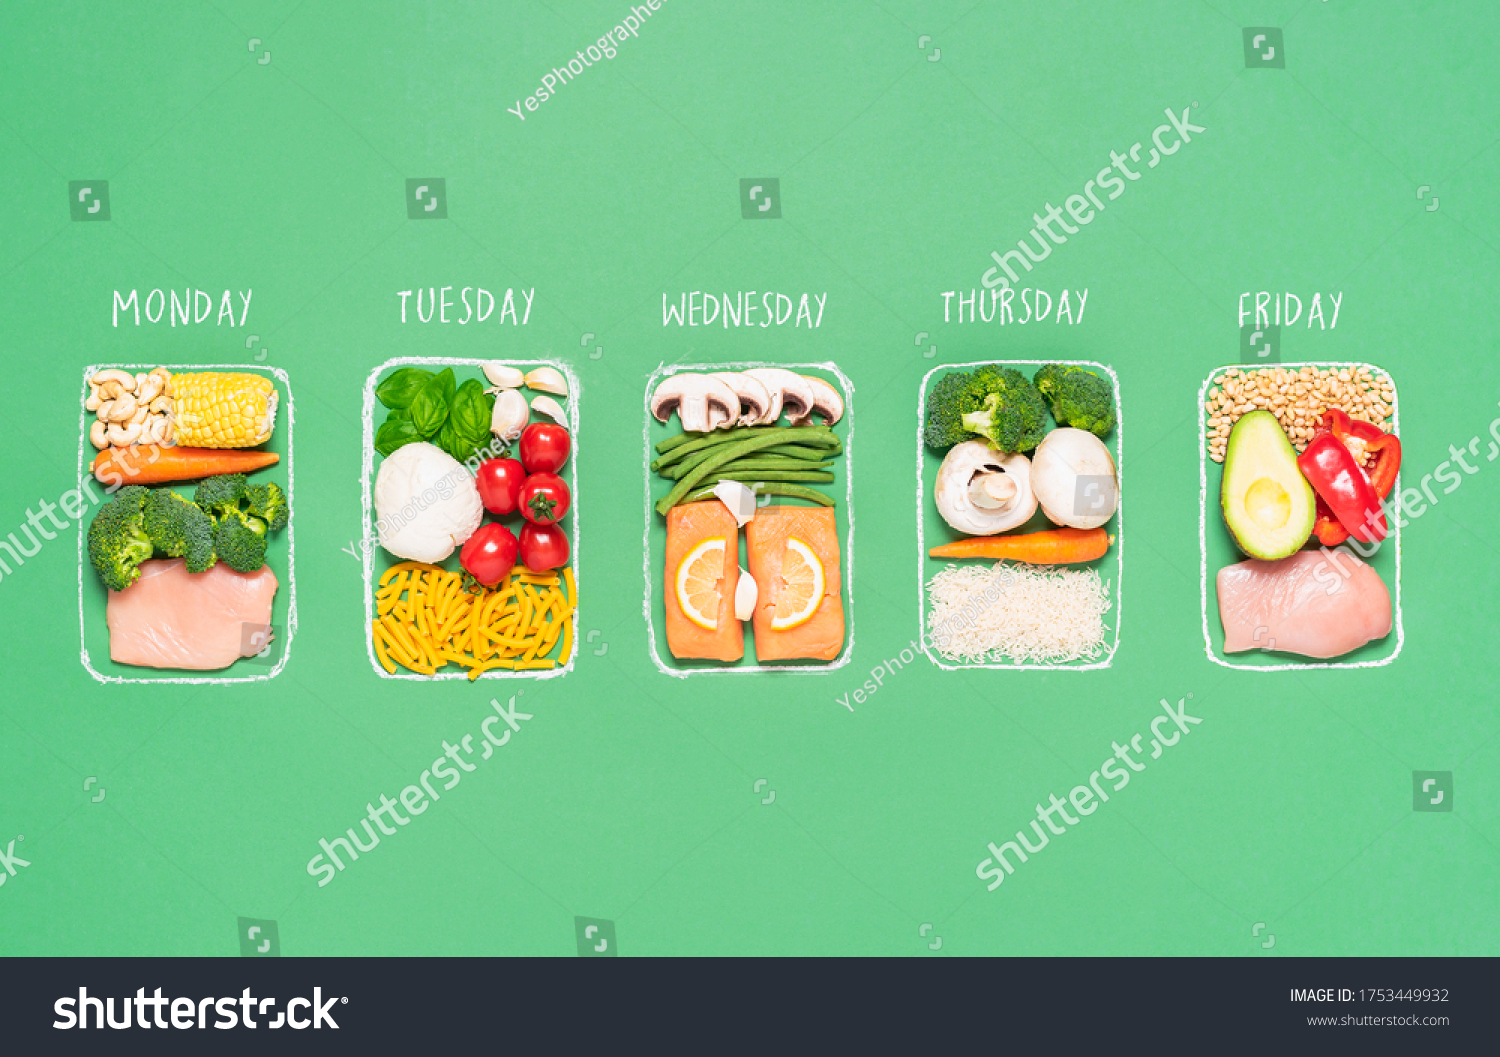 Weekly meal preparation concept with raw food ingredients in chalk-drawn lunch boxes on green background. Prep meals plan for the week. Healthy meals #1753449932